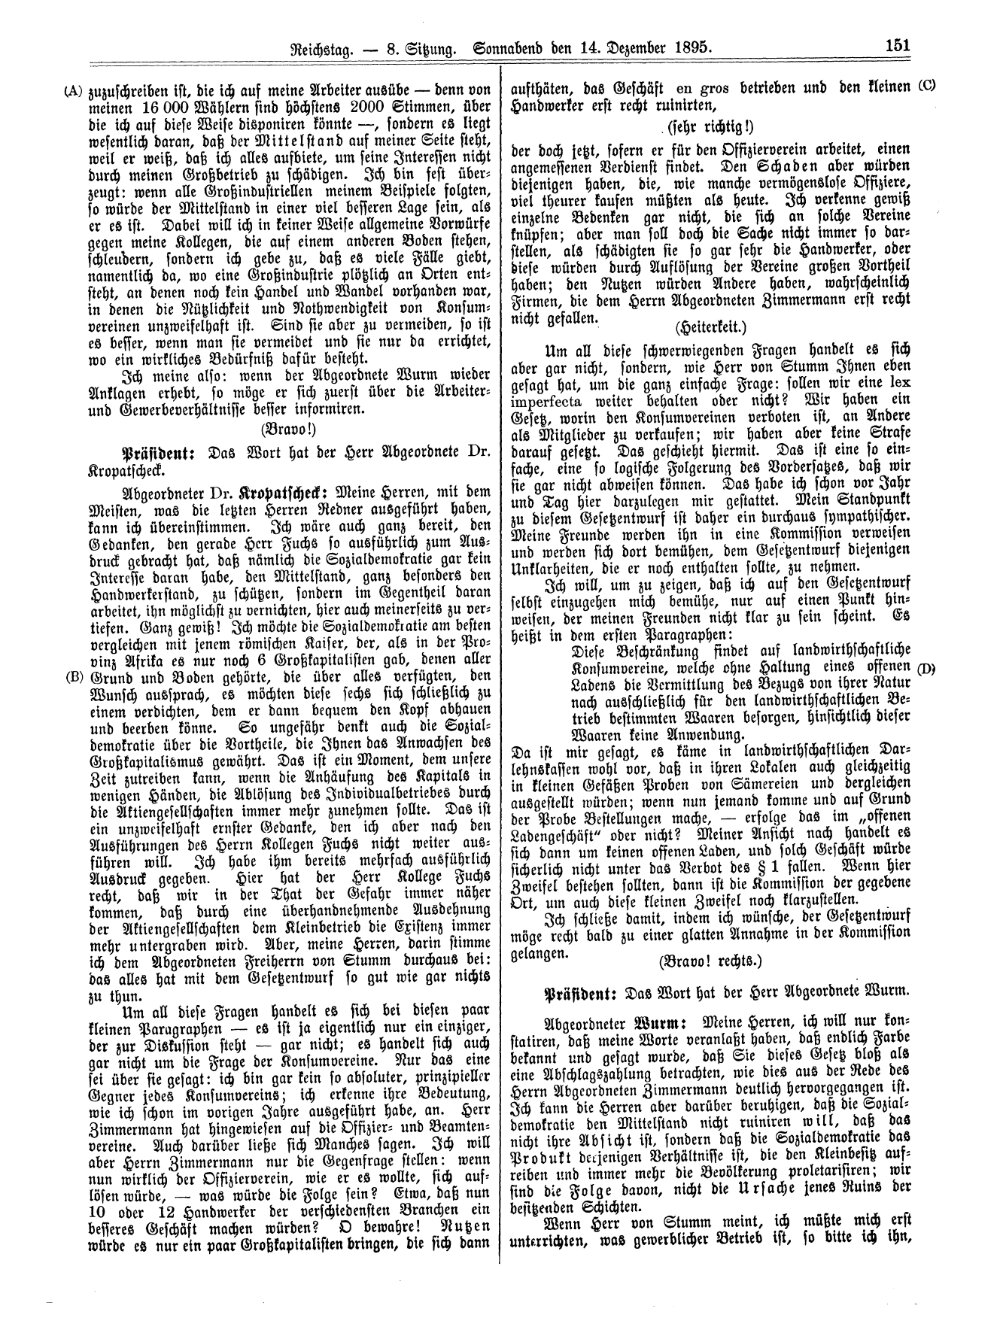 Scan of page 151